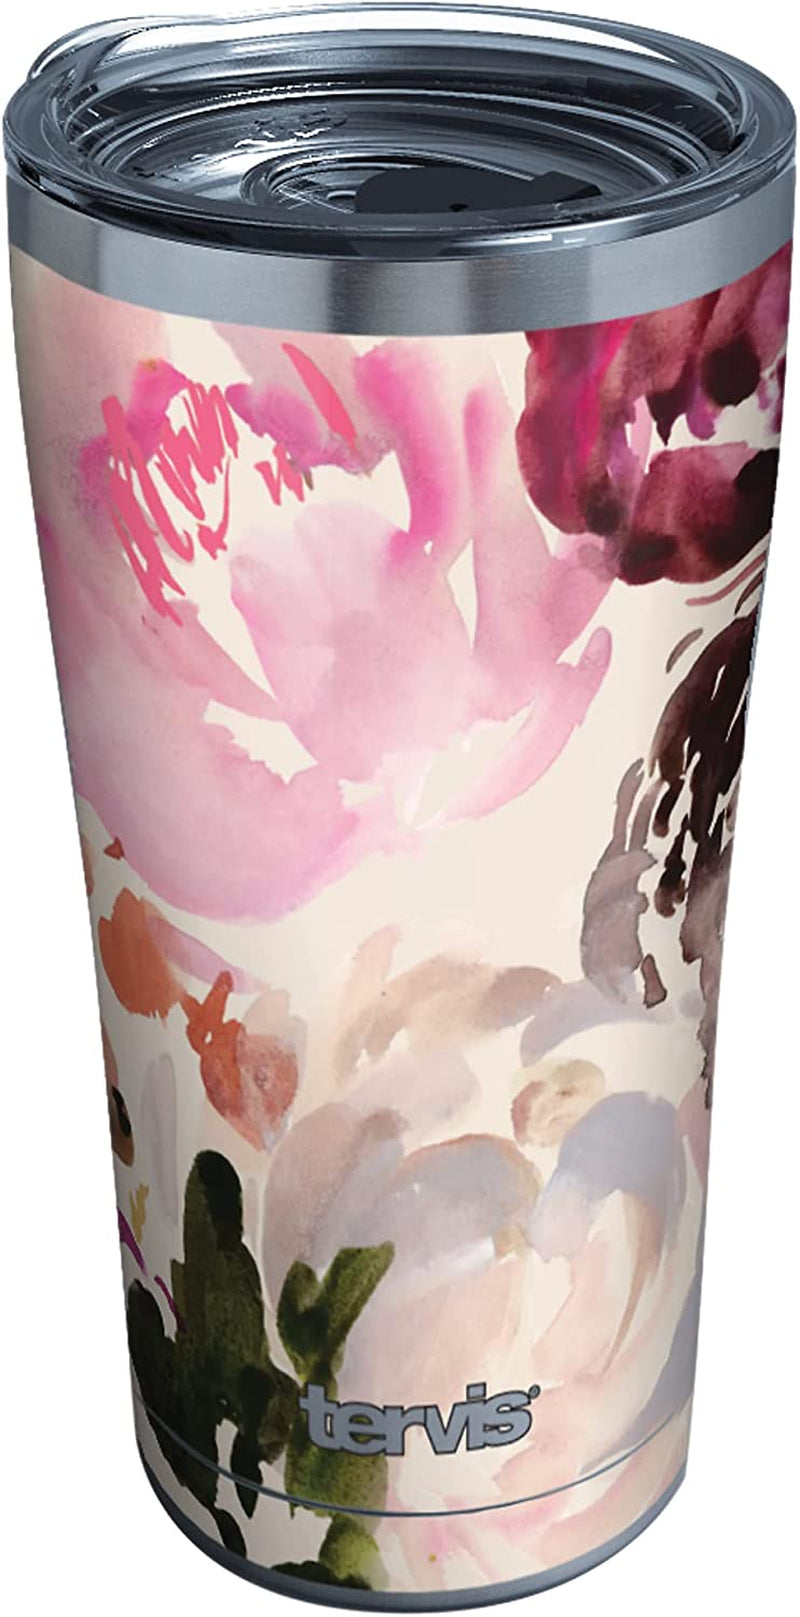 Tervis Made in USA Double Walled Kelly Ventura Floral Collection Insulated Tumbler Cup Keeps Drinks Cold & Hot, 16Oz 4Pk - Classic, Assorted Home & Garden > Kitchen & Dining > Tableware > Drinkware Tervis Posy 20oz - Stainless Steel 